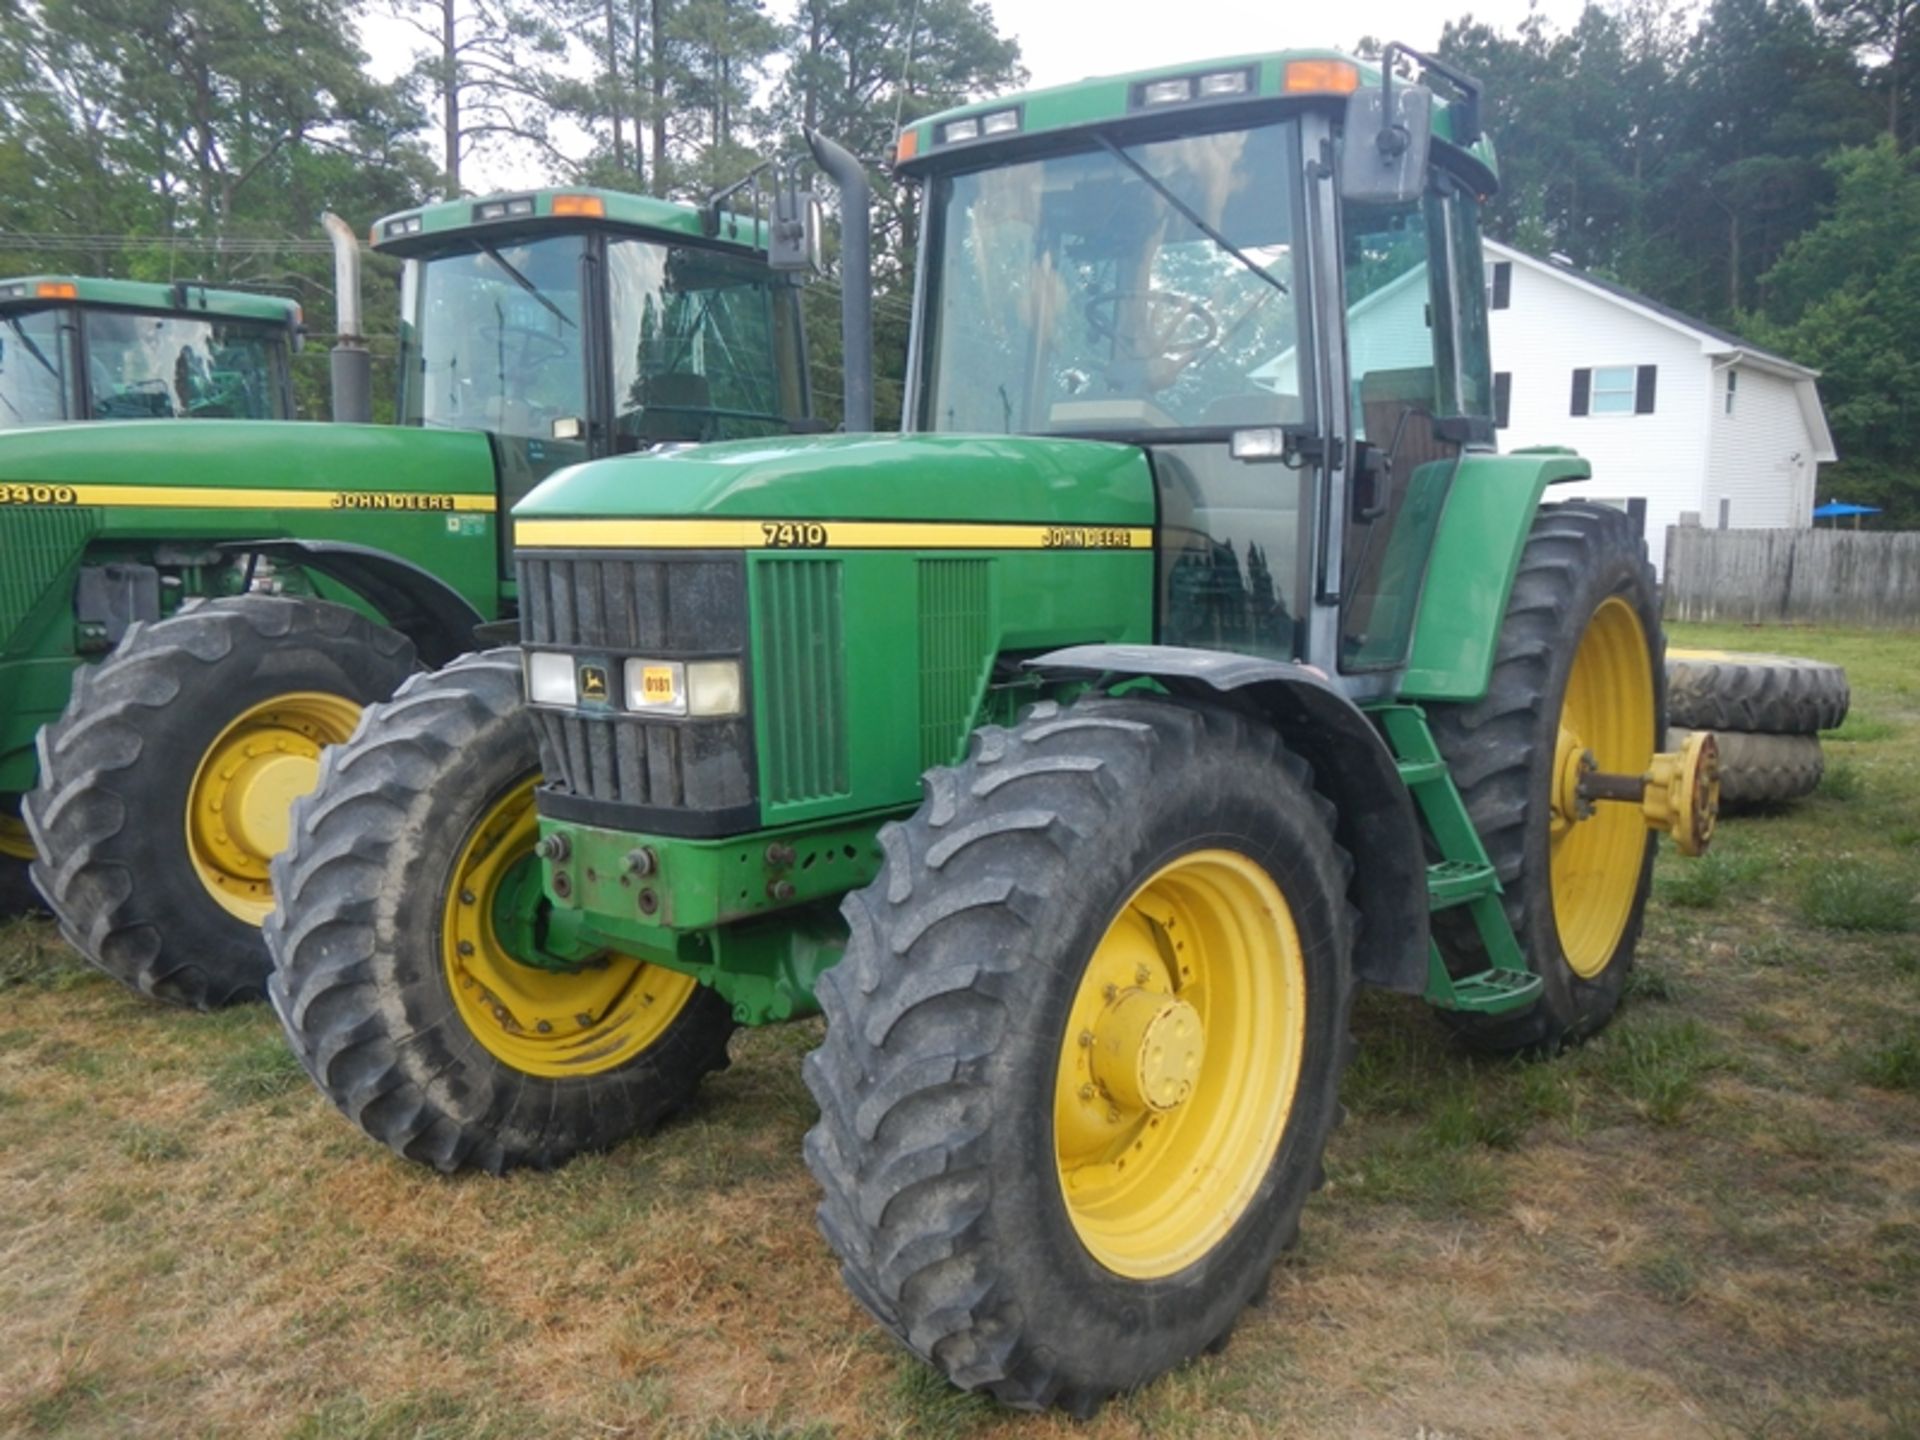 JOHN DEERE 7410 tractor - 4wd, 14.9R46 duals - 2,654 hrs - Serial RW7410H07342